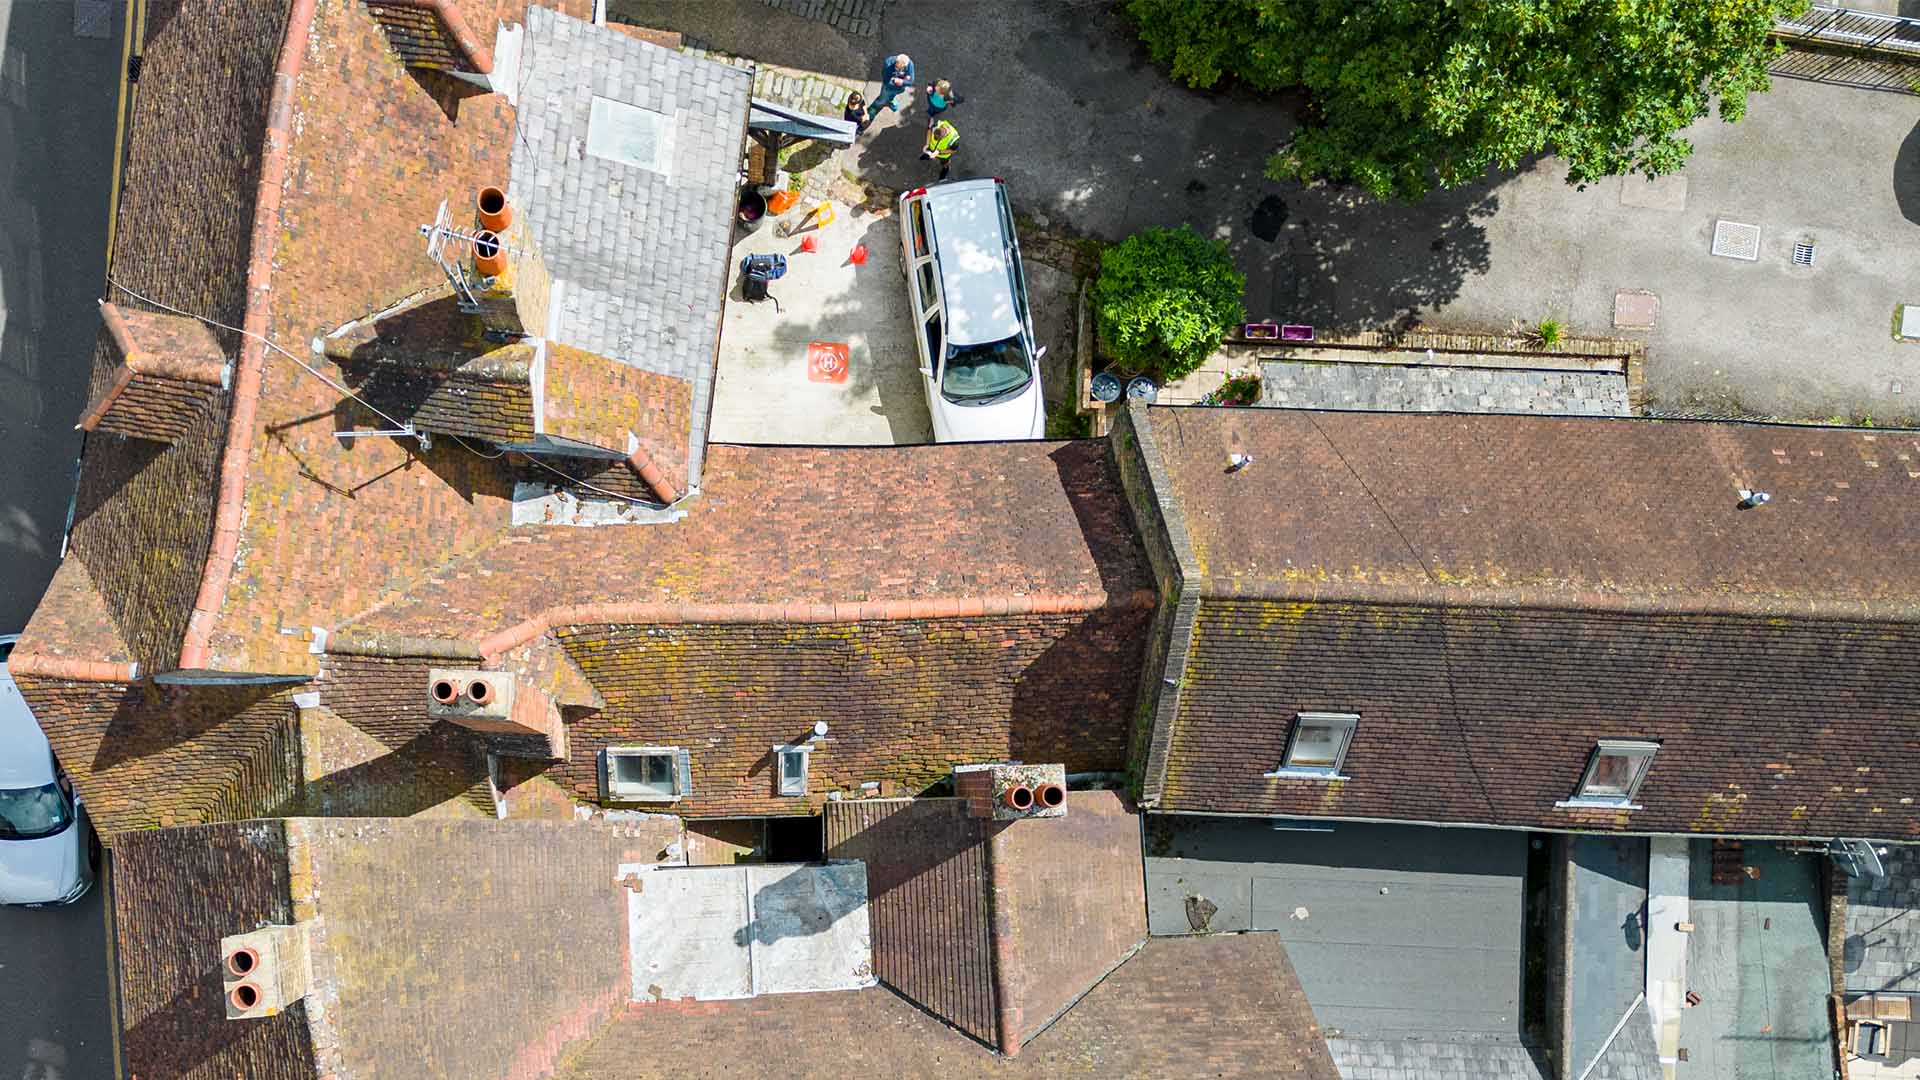 Redefining Roof Inspections: How Drone Technology Saved Time and Money on a 17th Century Home